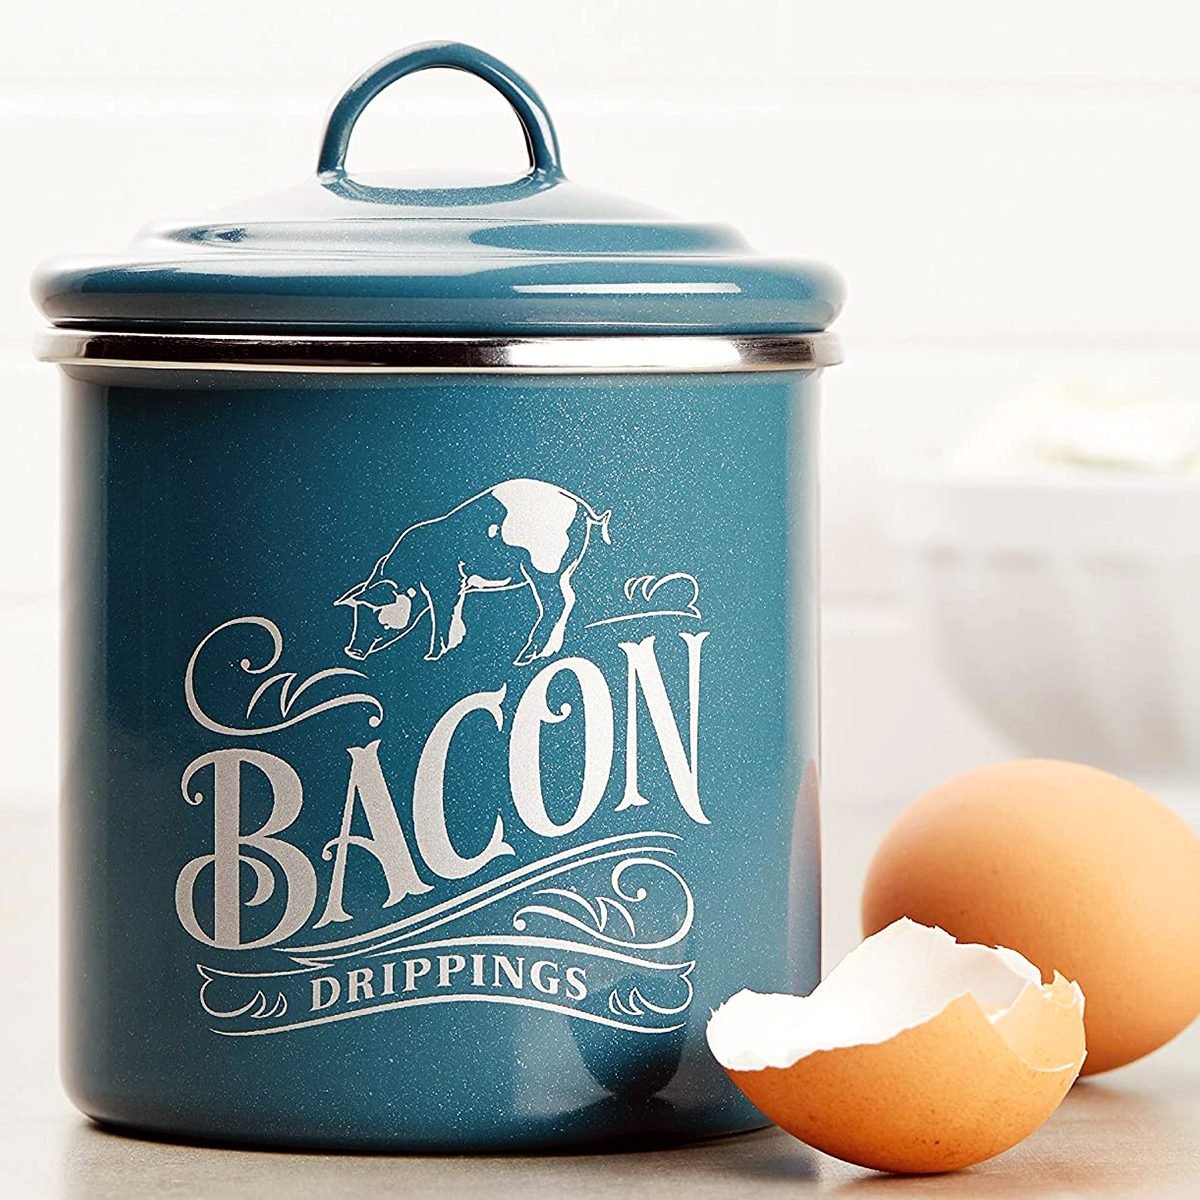 Ceramic Bacon Grease Container with Strainer - 600ml / 20oz Farmhouse Bacon Grea